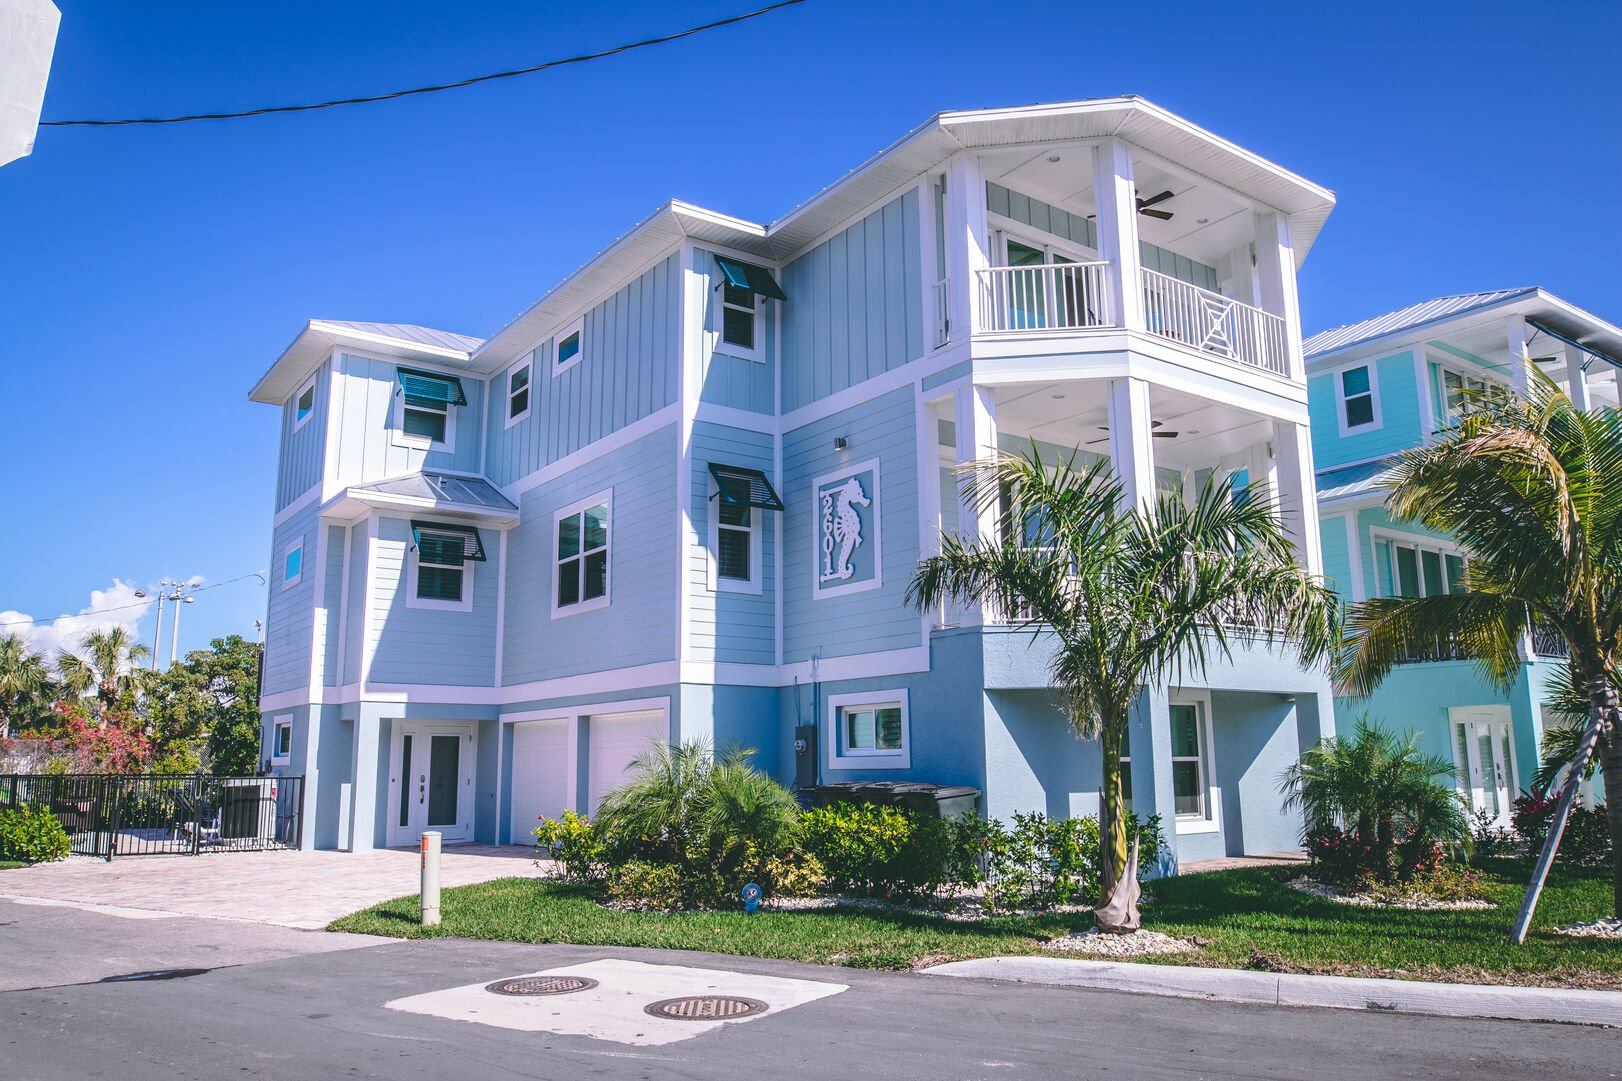 The Seahorse   Vacation Rental in Fort Myers Beach, Florida ...